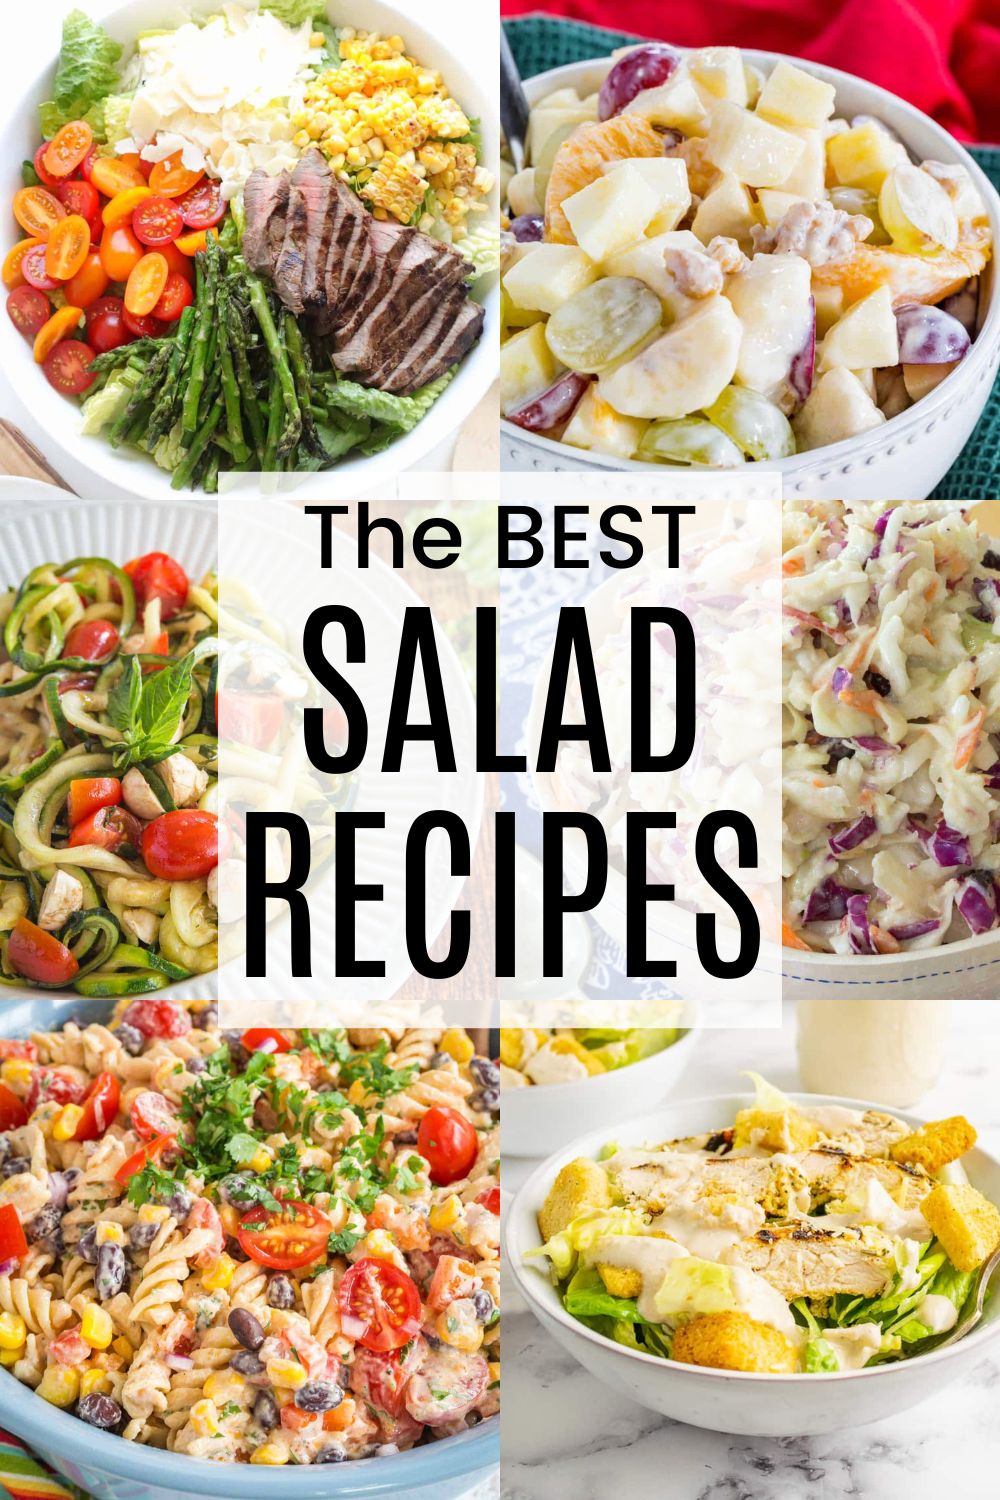 A two-by-three collage of different salads like grilled steak salad, mexican pasta salad, caesar salad, coleslaw and more with a translucent white box overlay with text that says "The Best Salad Recipes".